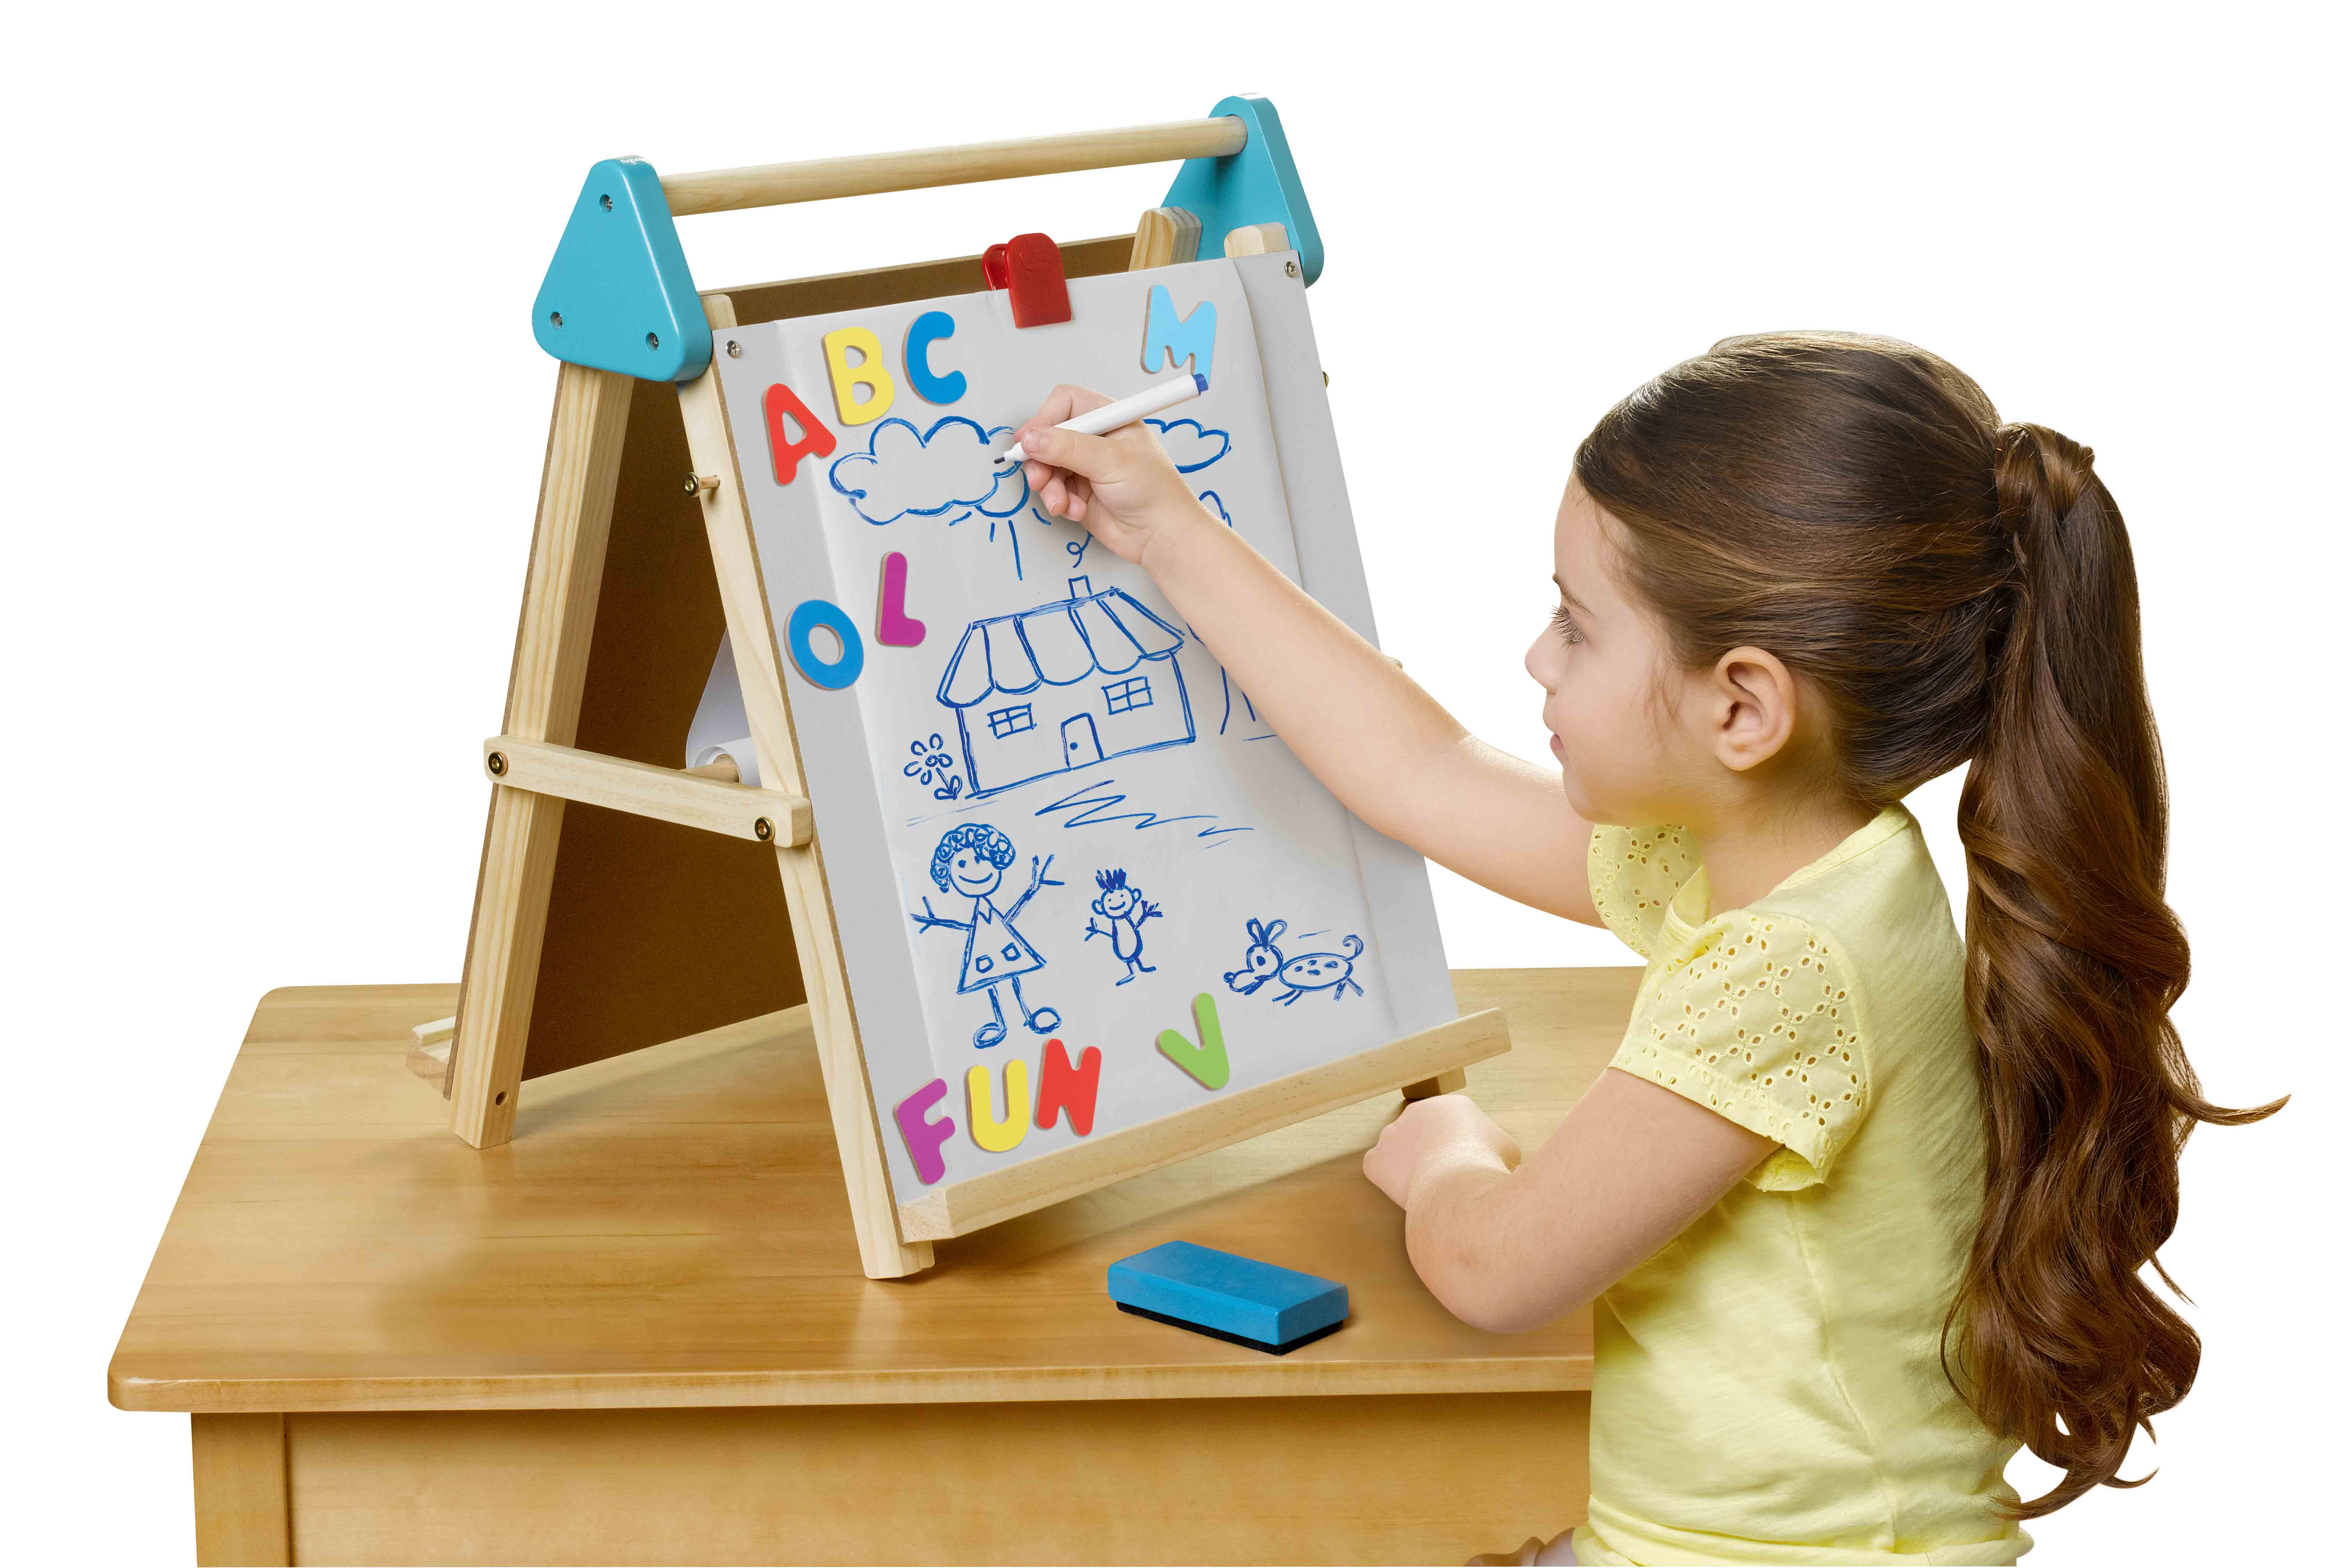  Contender Art Easel for Kids, Double Sided Wooden Centre Ideal  for 4 Toddlers, Arts and Craft Table with Storage Cabinet and 16 No Spill  Paint Cups and Lids : Toys & Games